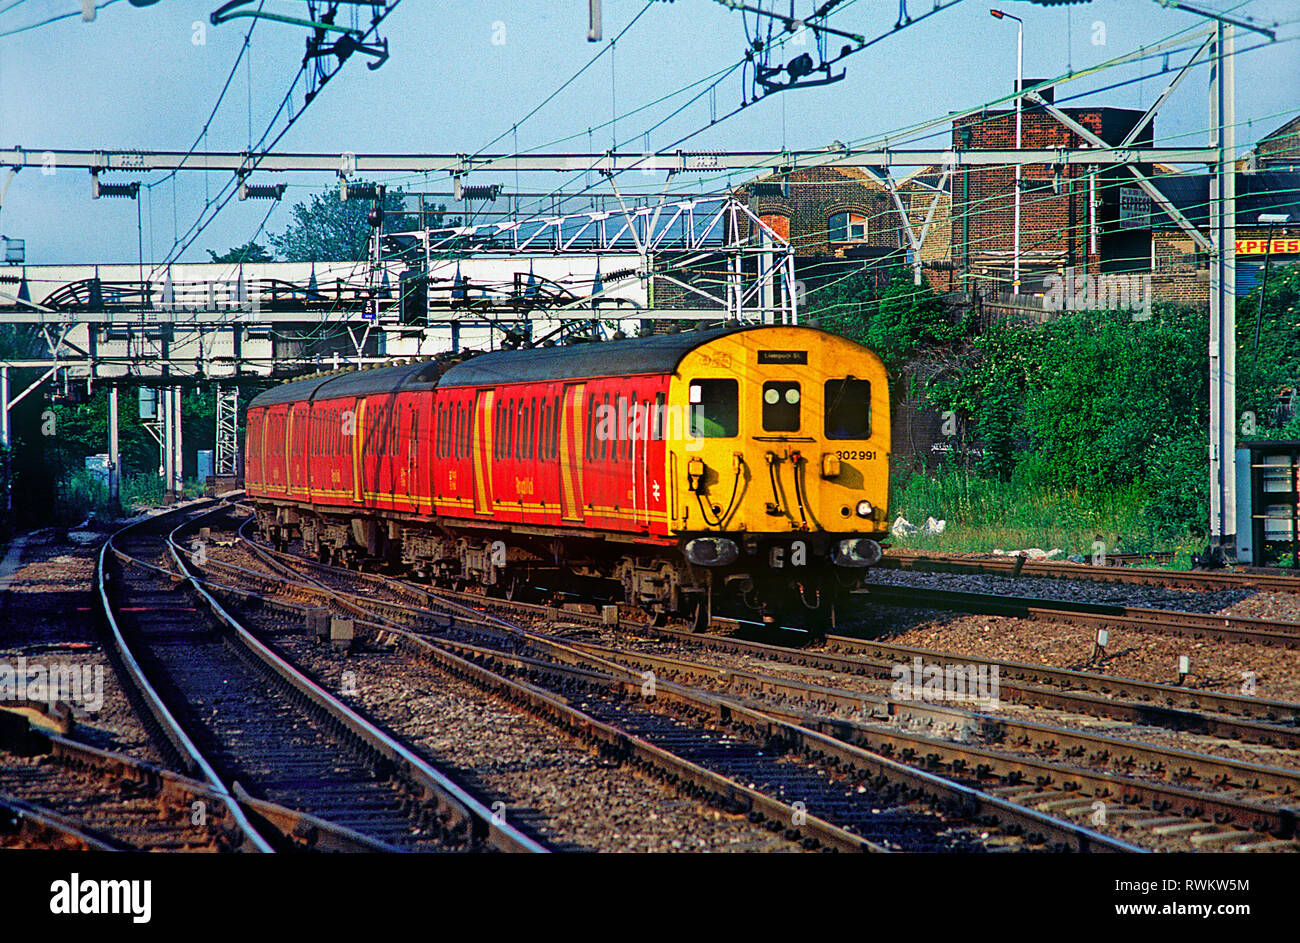 Class 302 parcels unit number 302991 passing Stratford in East London. 4th July 1991. Stock Photo